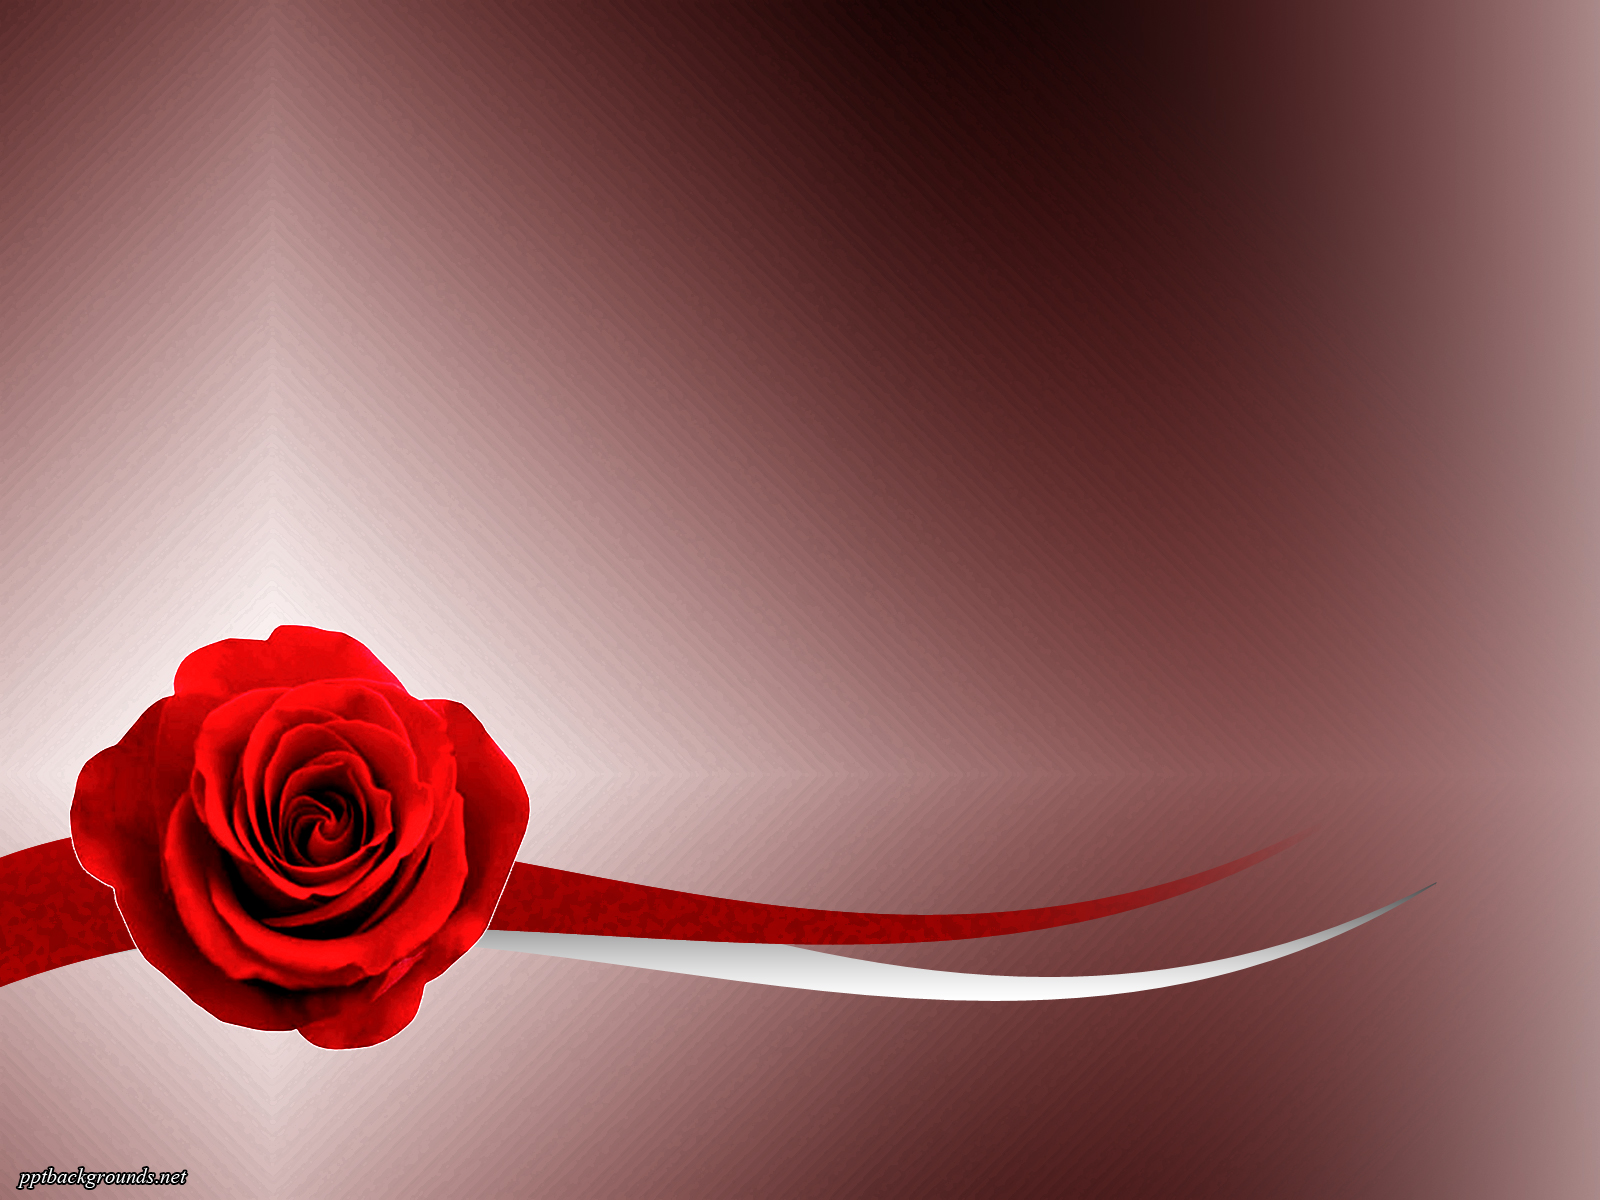 Free Red Rose On The Abstract Background Backgrounds For